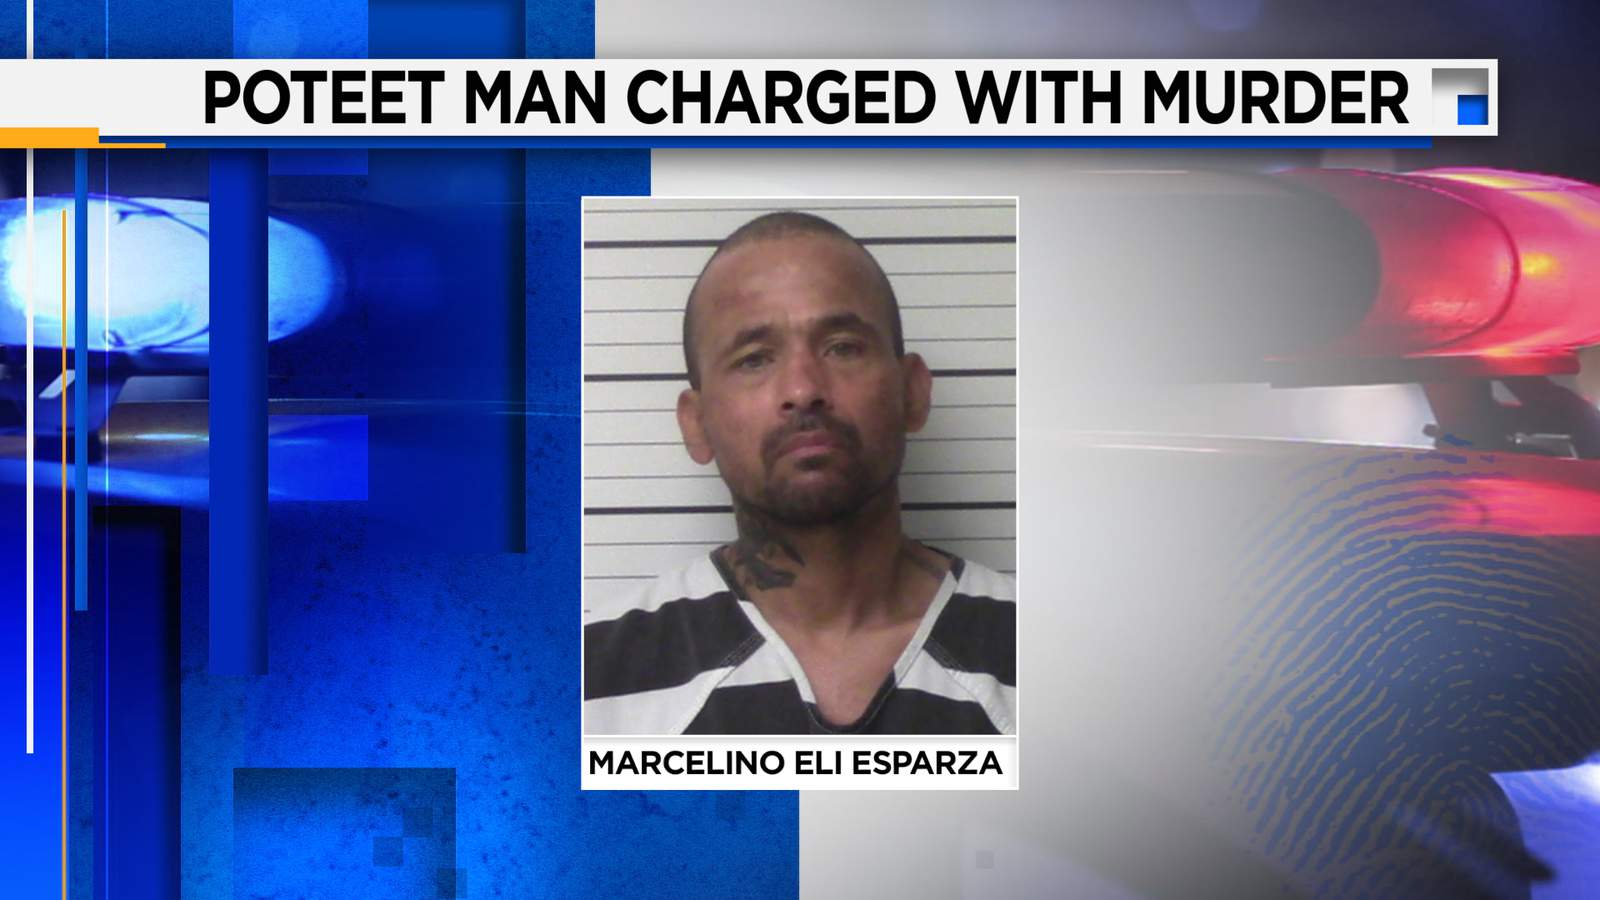 Poteet man accused of strangling woman charged with murder, officials say